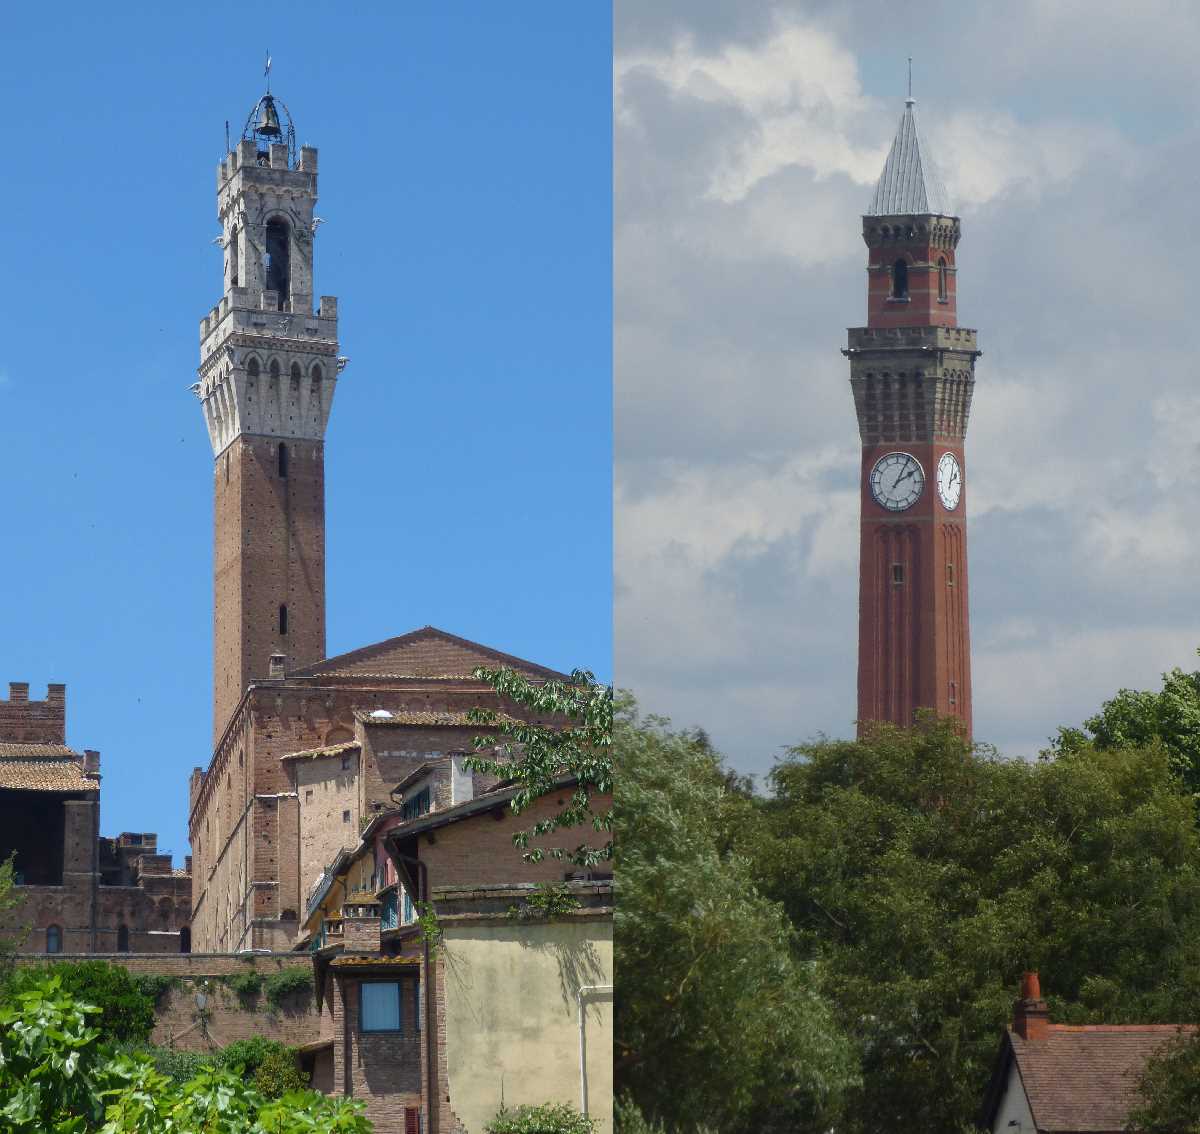 Chamberlain Memorial Clock Tower inspired by the Torre del Mangia in Siena, Italy